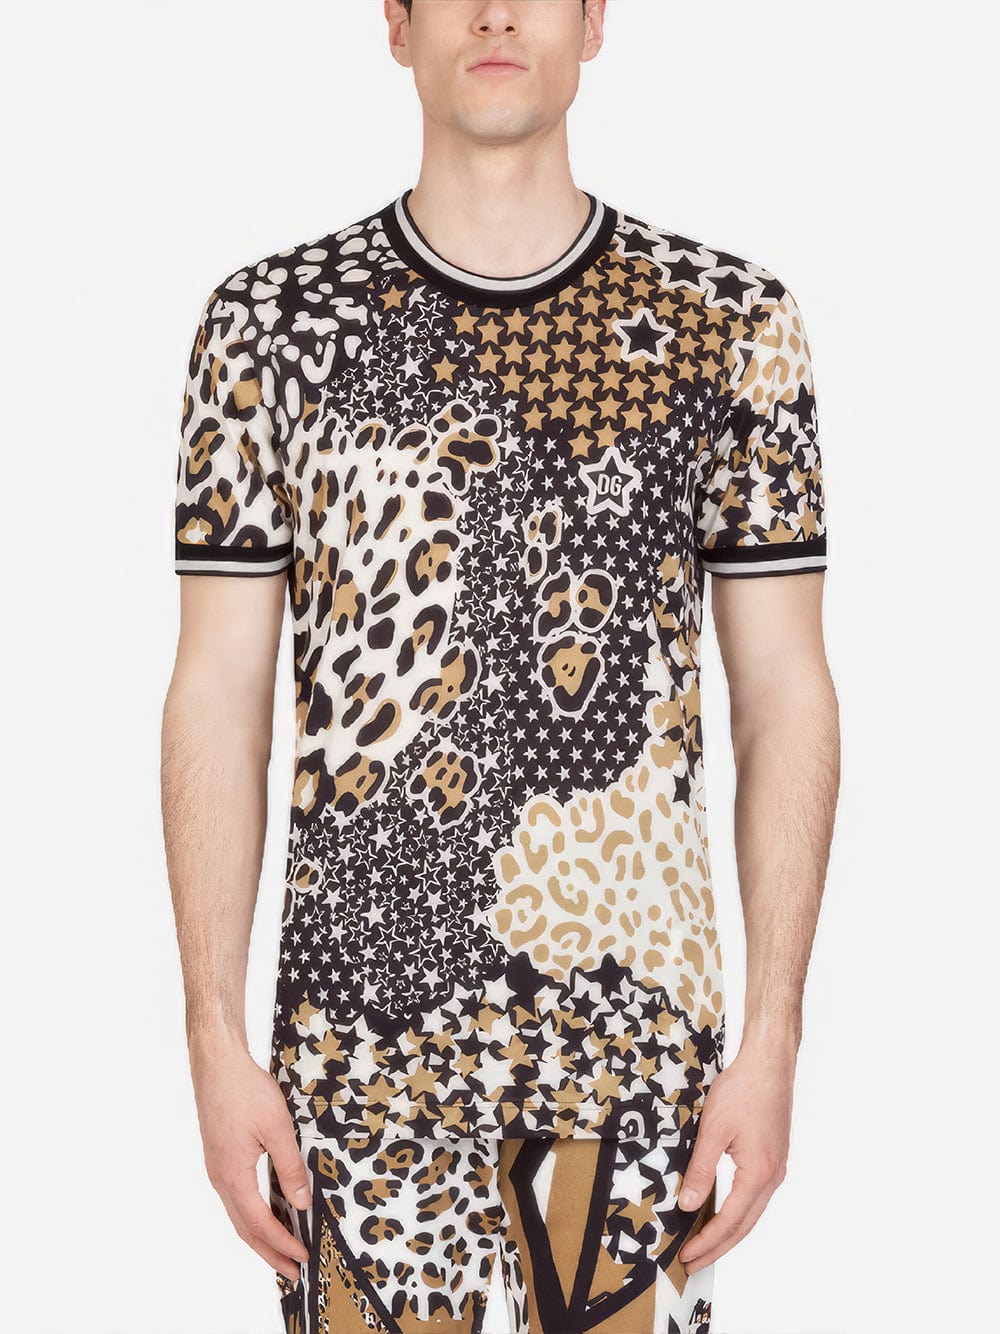 Dolce & Gabbana Multicolored Camouflage Print T-shirt